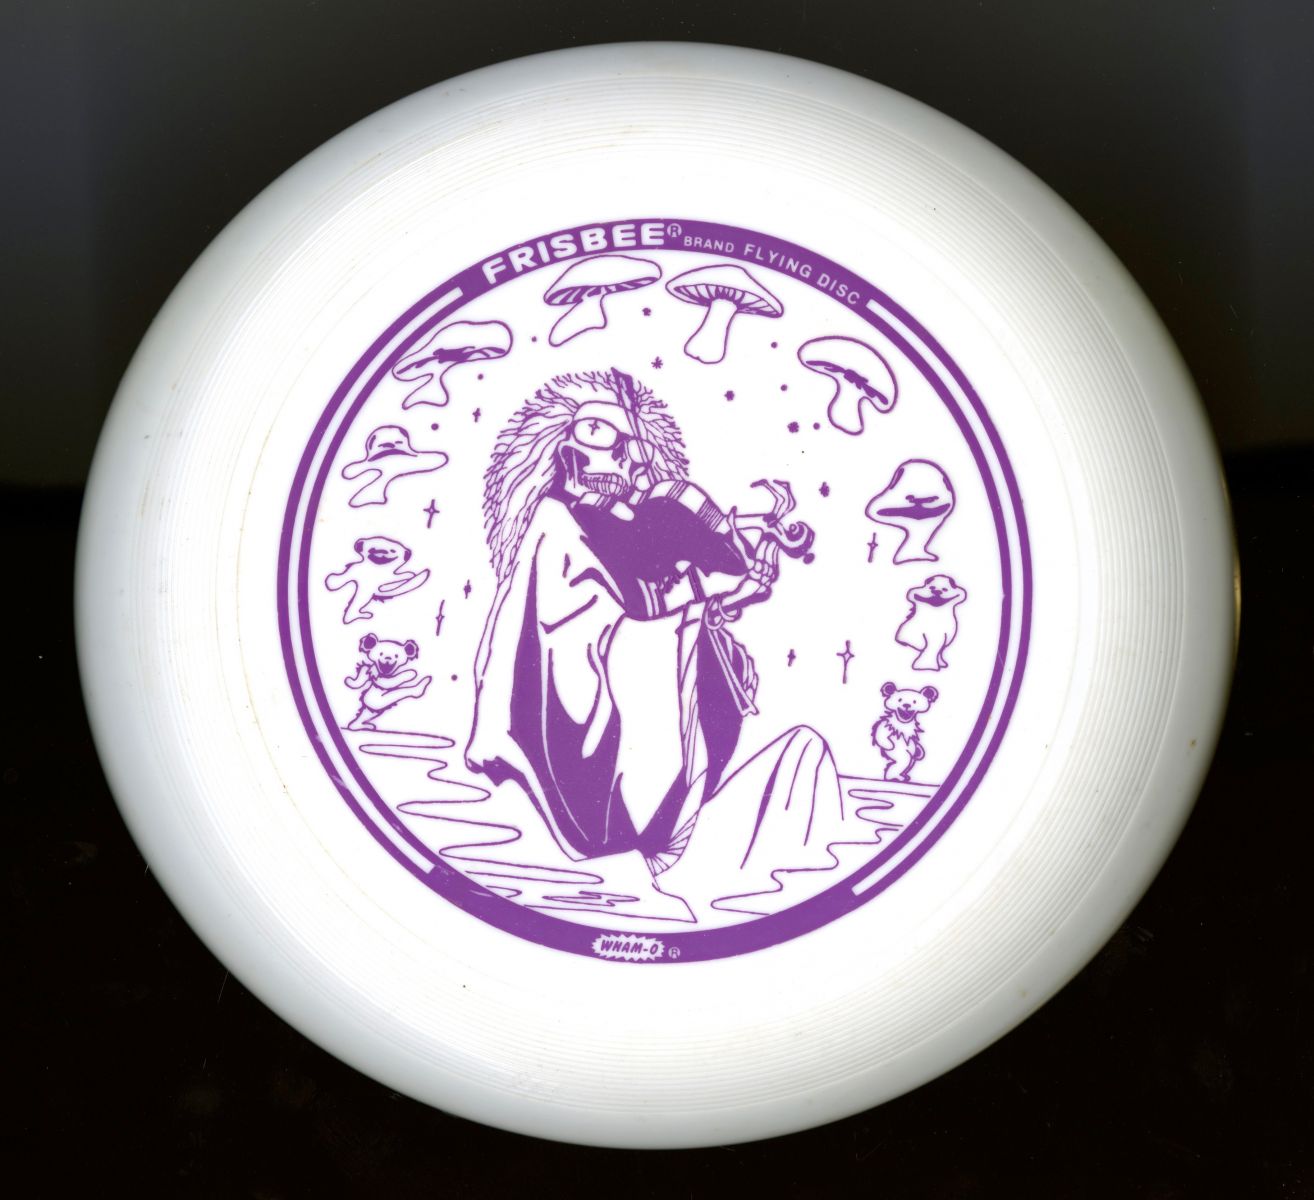 White frisbee with a purple graphic reminiscent of the album cover of the Grateful Dead's album "Blues for Allah." Dancing bears, mushrooms, and stars line the perimeter of the disc's design.